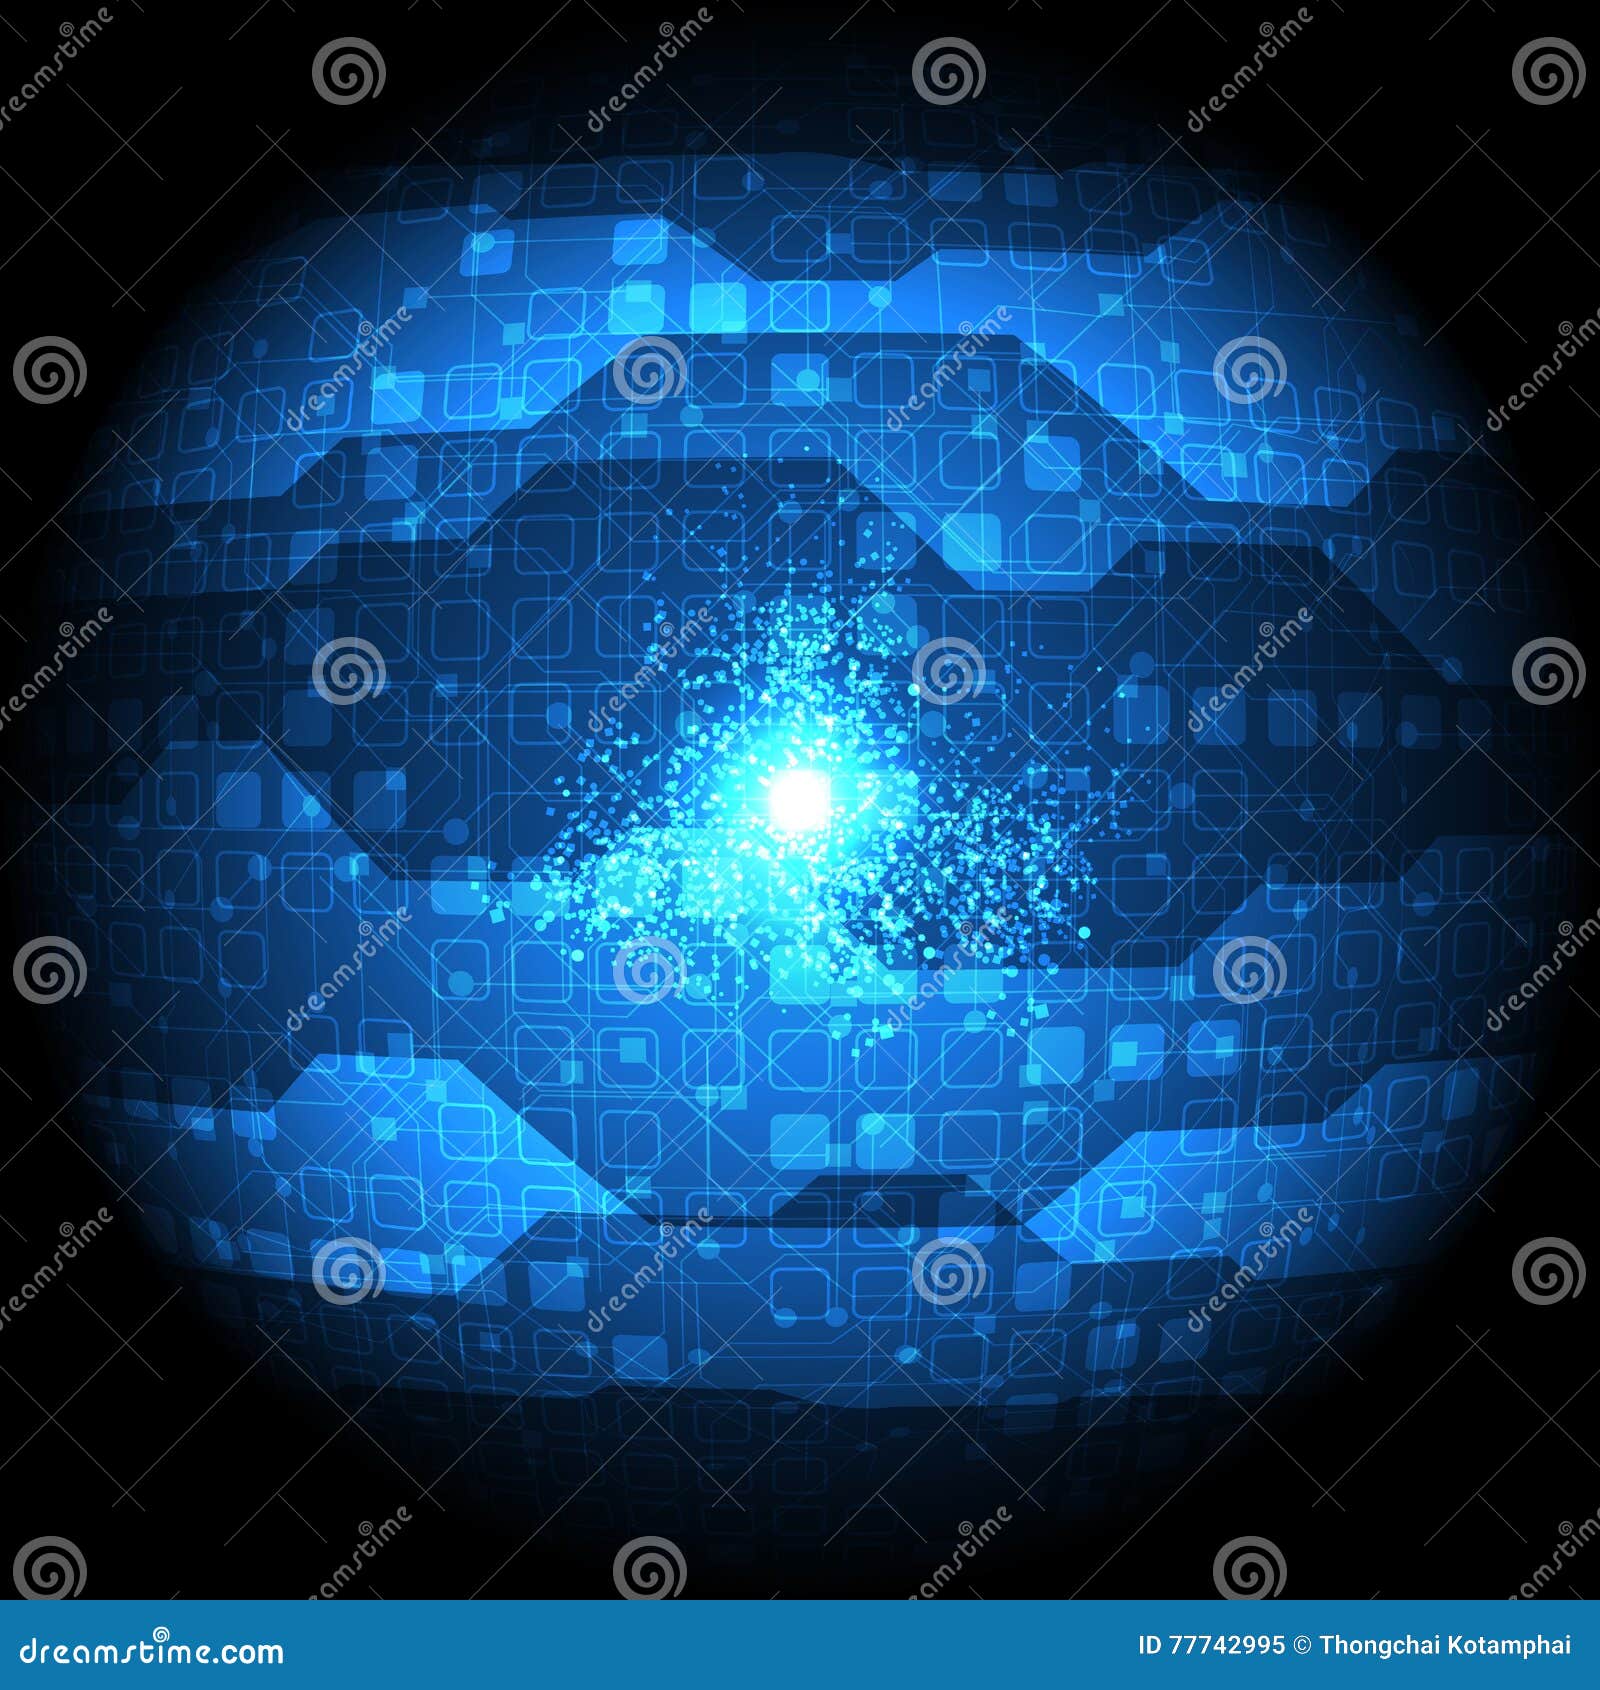 Vector Abstract Background Technology Illustration Stock Vector